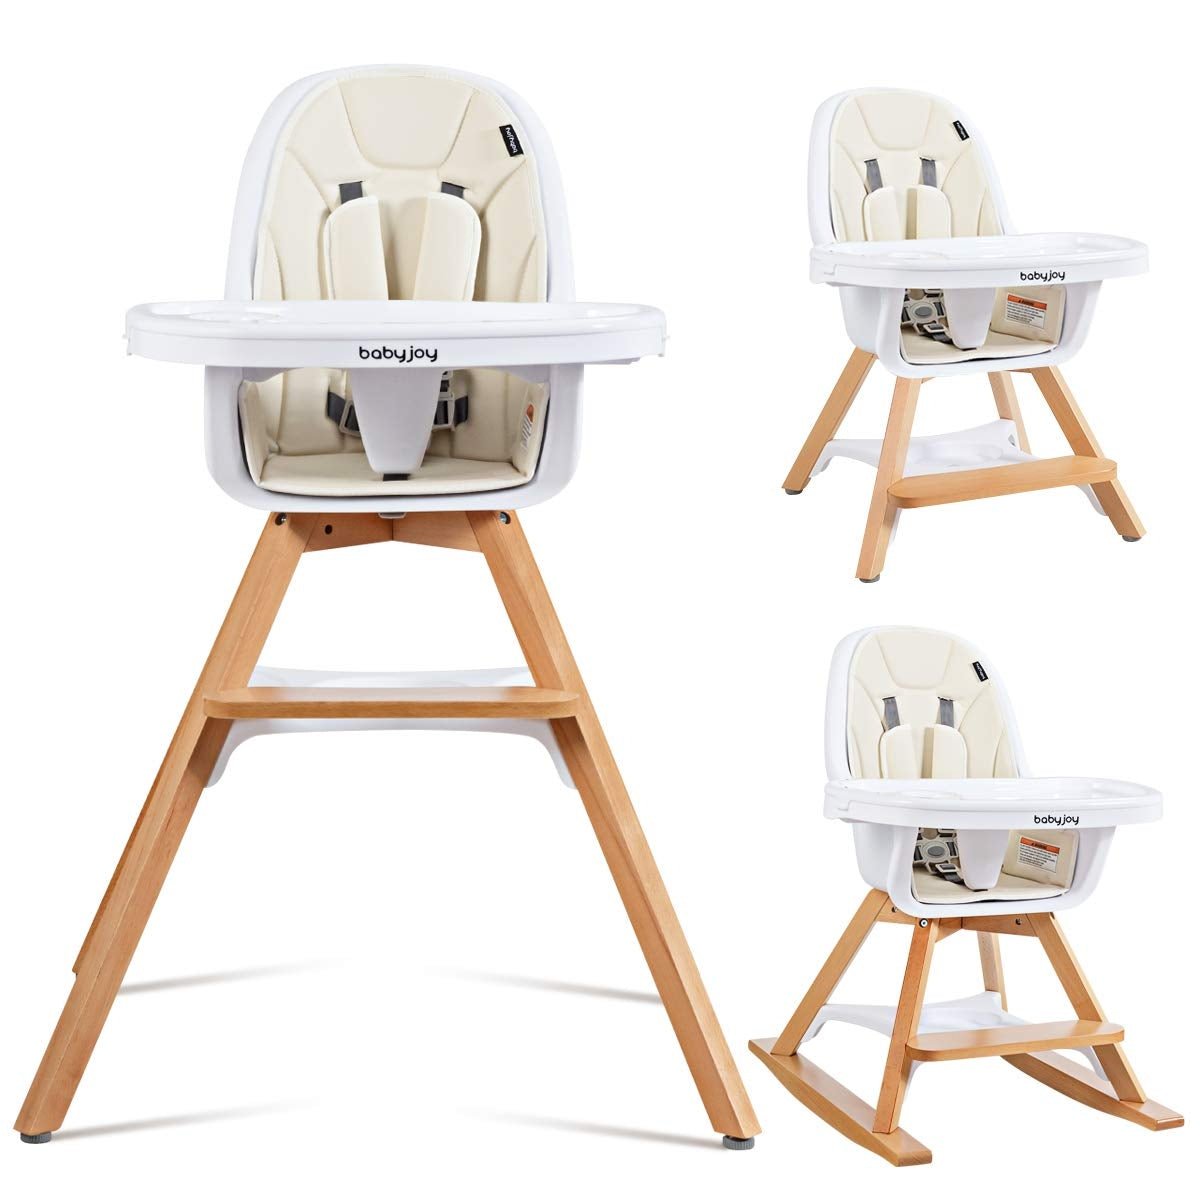 3-in-1 Convertible Baby High Chair with Replaceable Legs and Rocking Bar at Gallery Canada